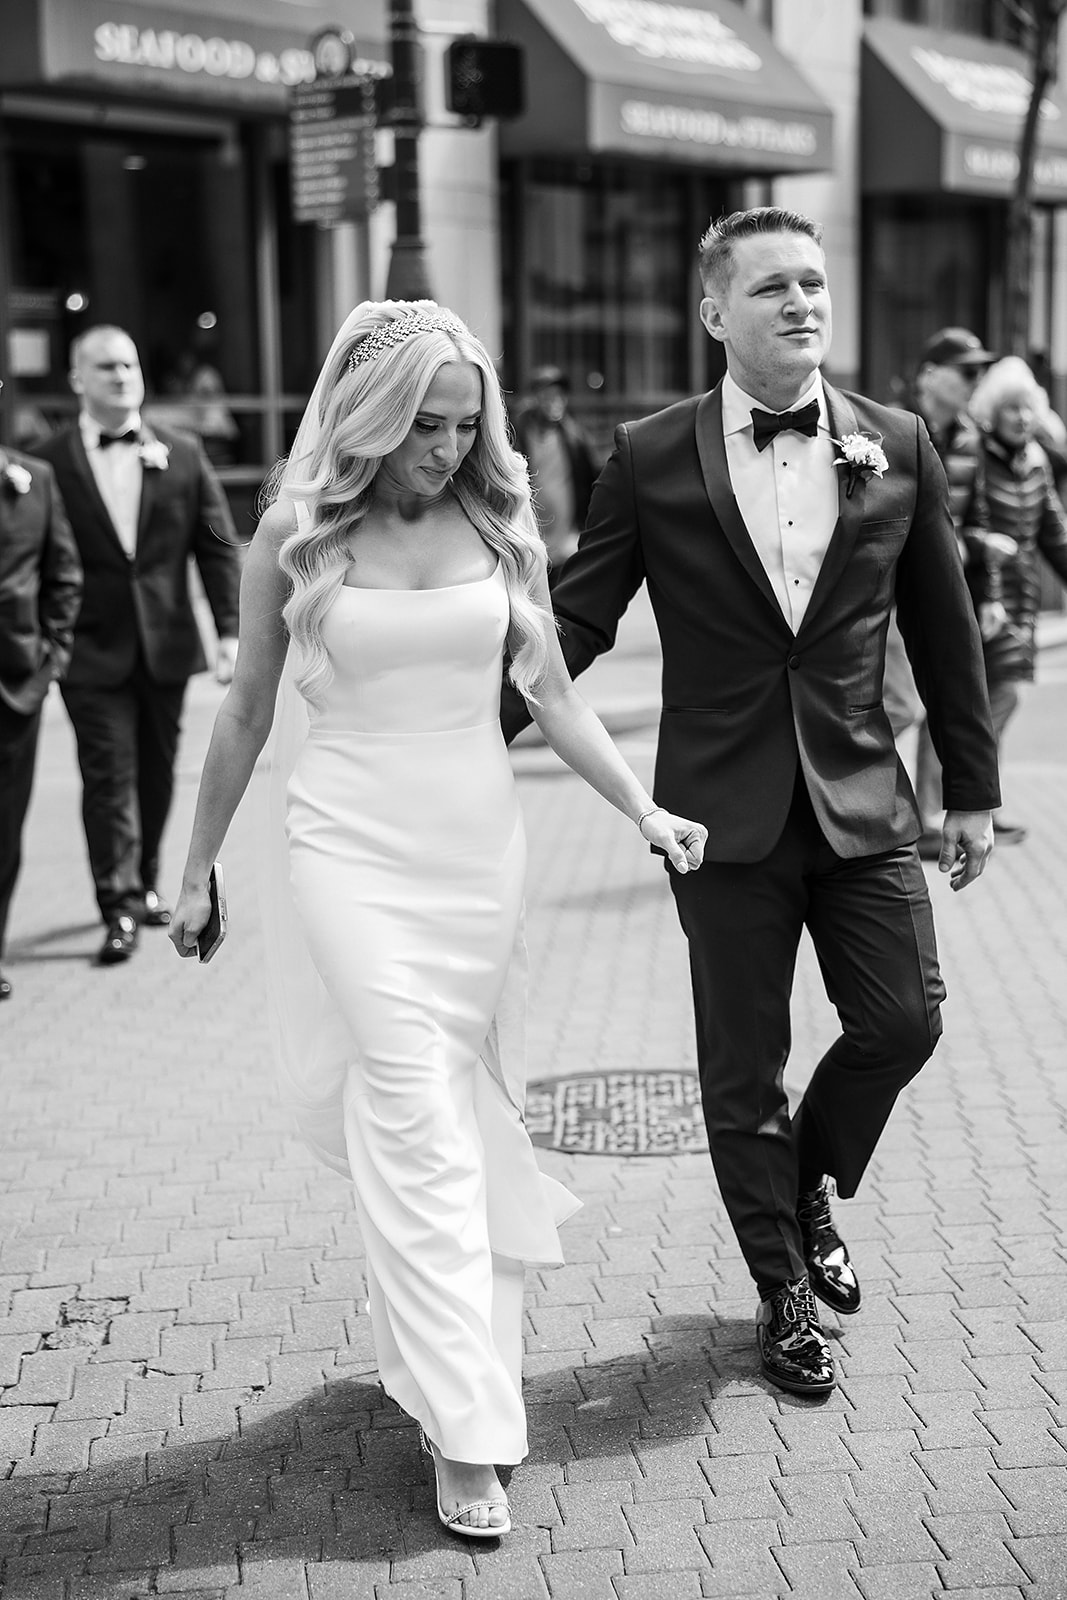 Candid black and white photo of the bride and groom on the street in the center city of Philadelphia